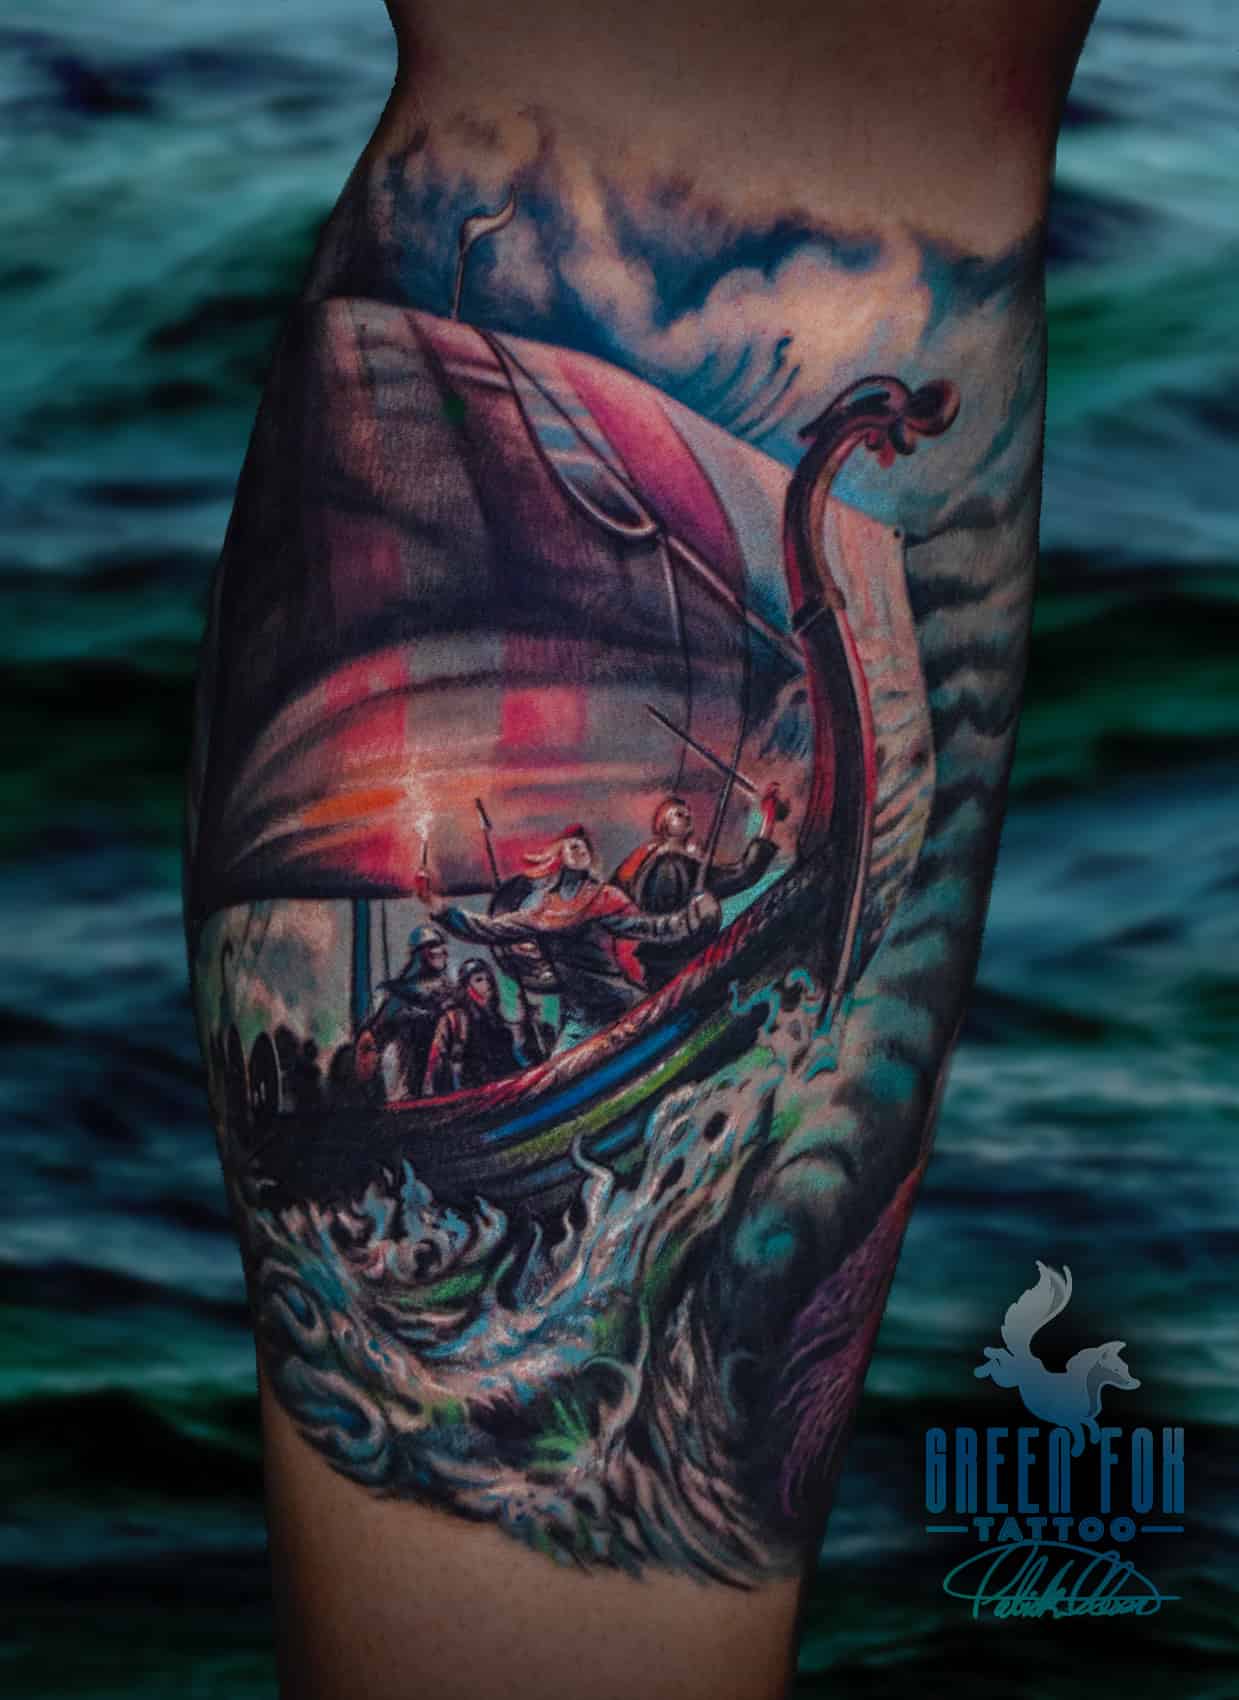 Viking Ship done by Jason Walstrom at Sea Wolf Tattoo in Minneapolis MN  Waited a long time to have this done So excited about it  rtattoos